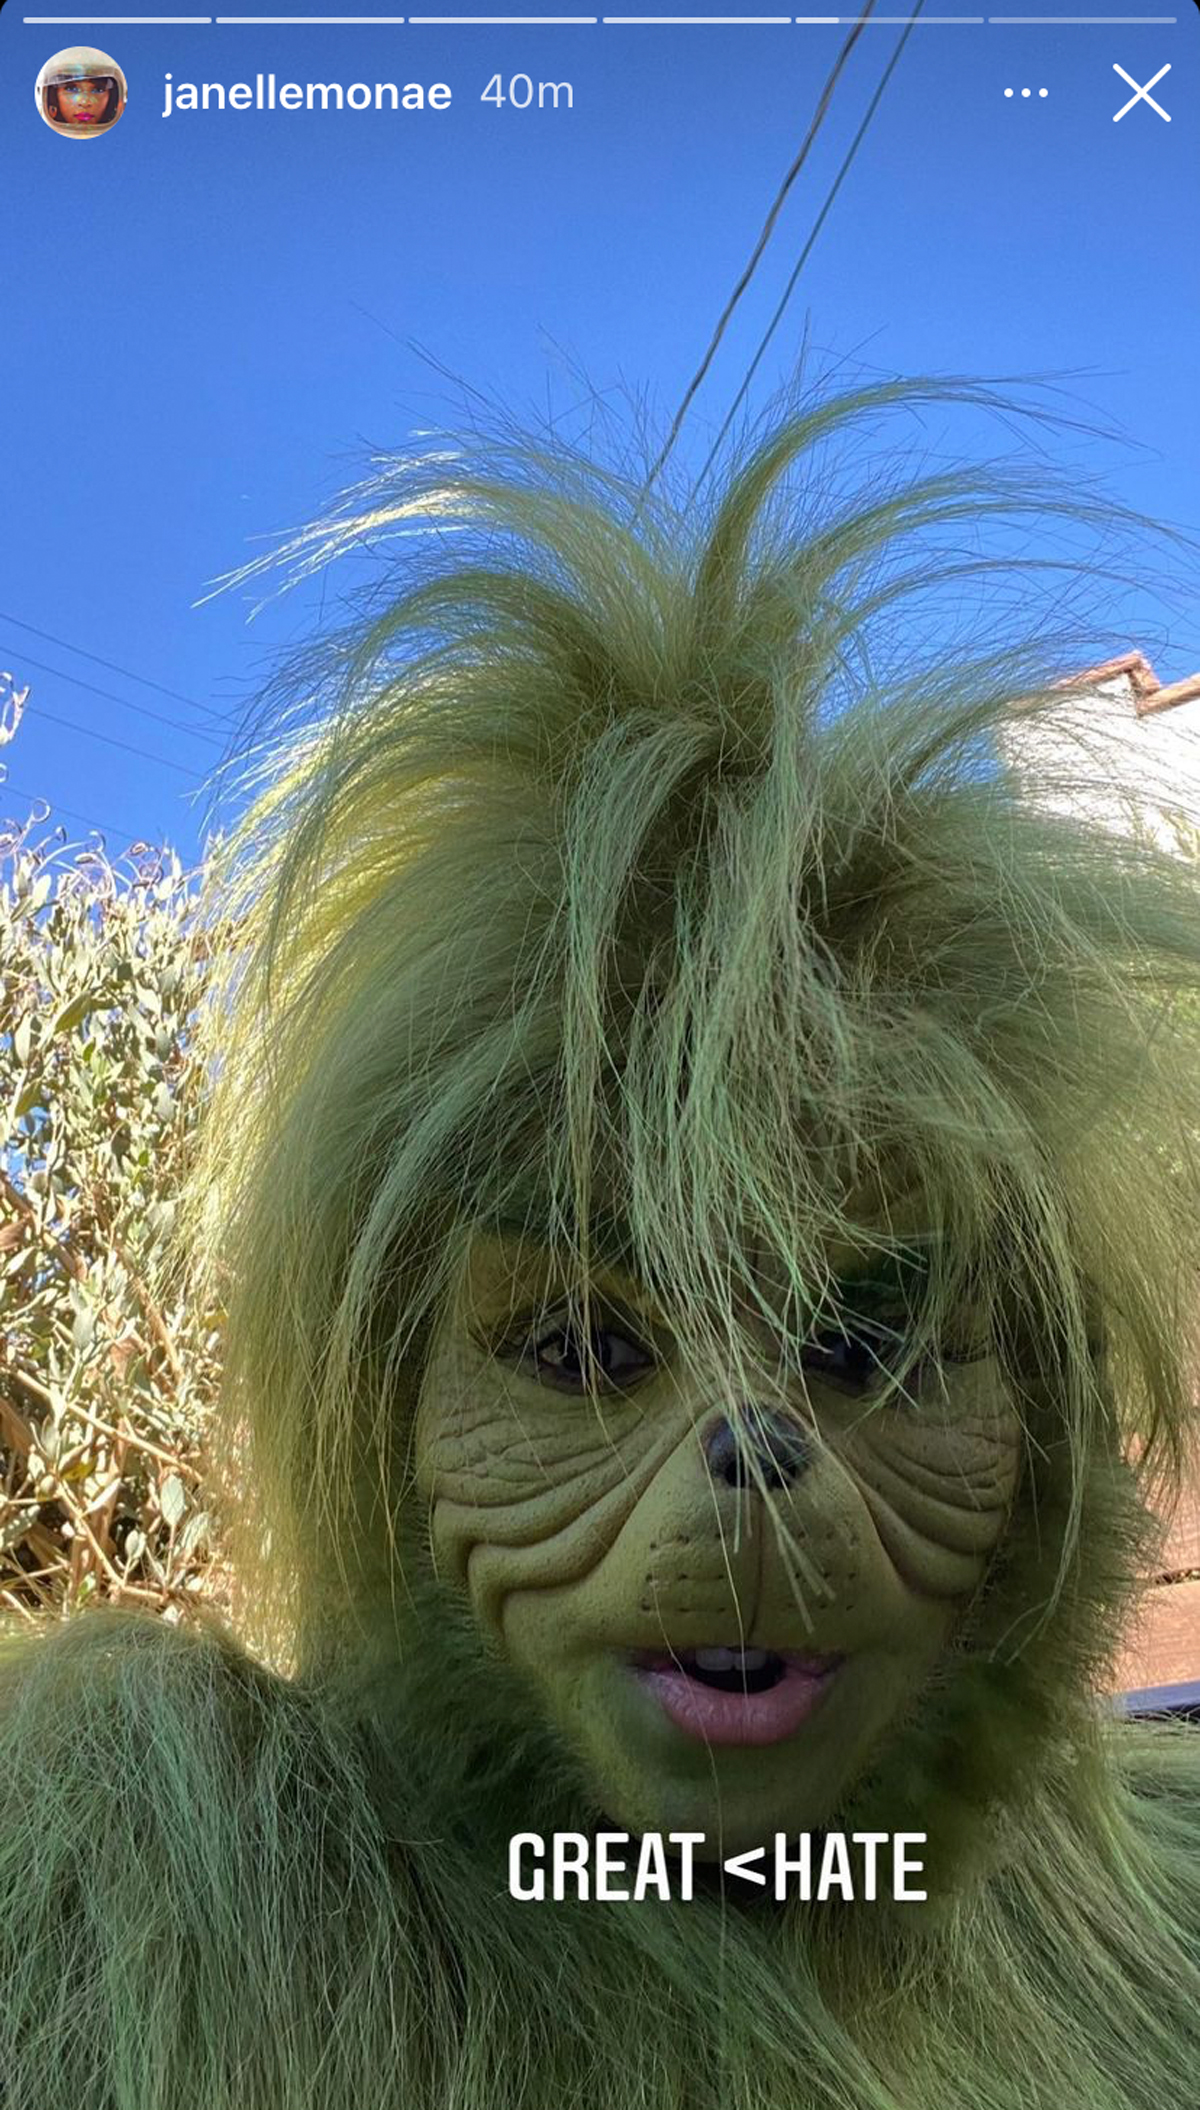 Janelle Monae Dresses As The Grinch For Halloween 2021